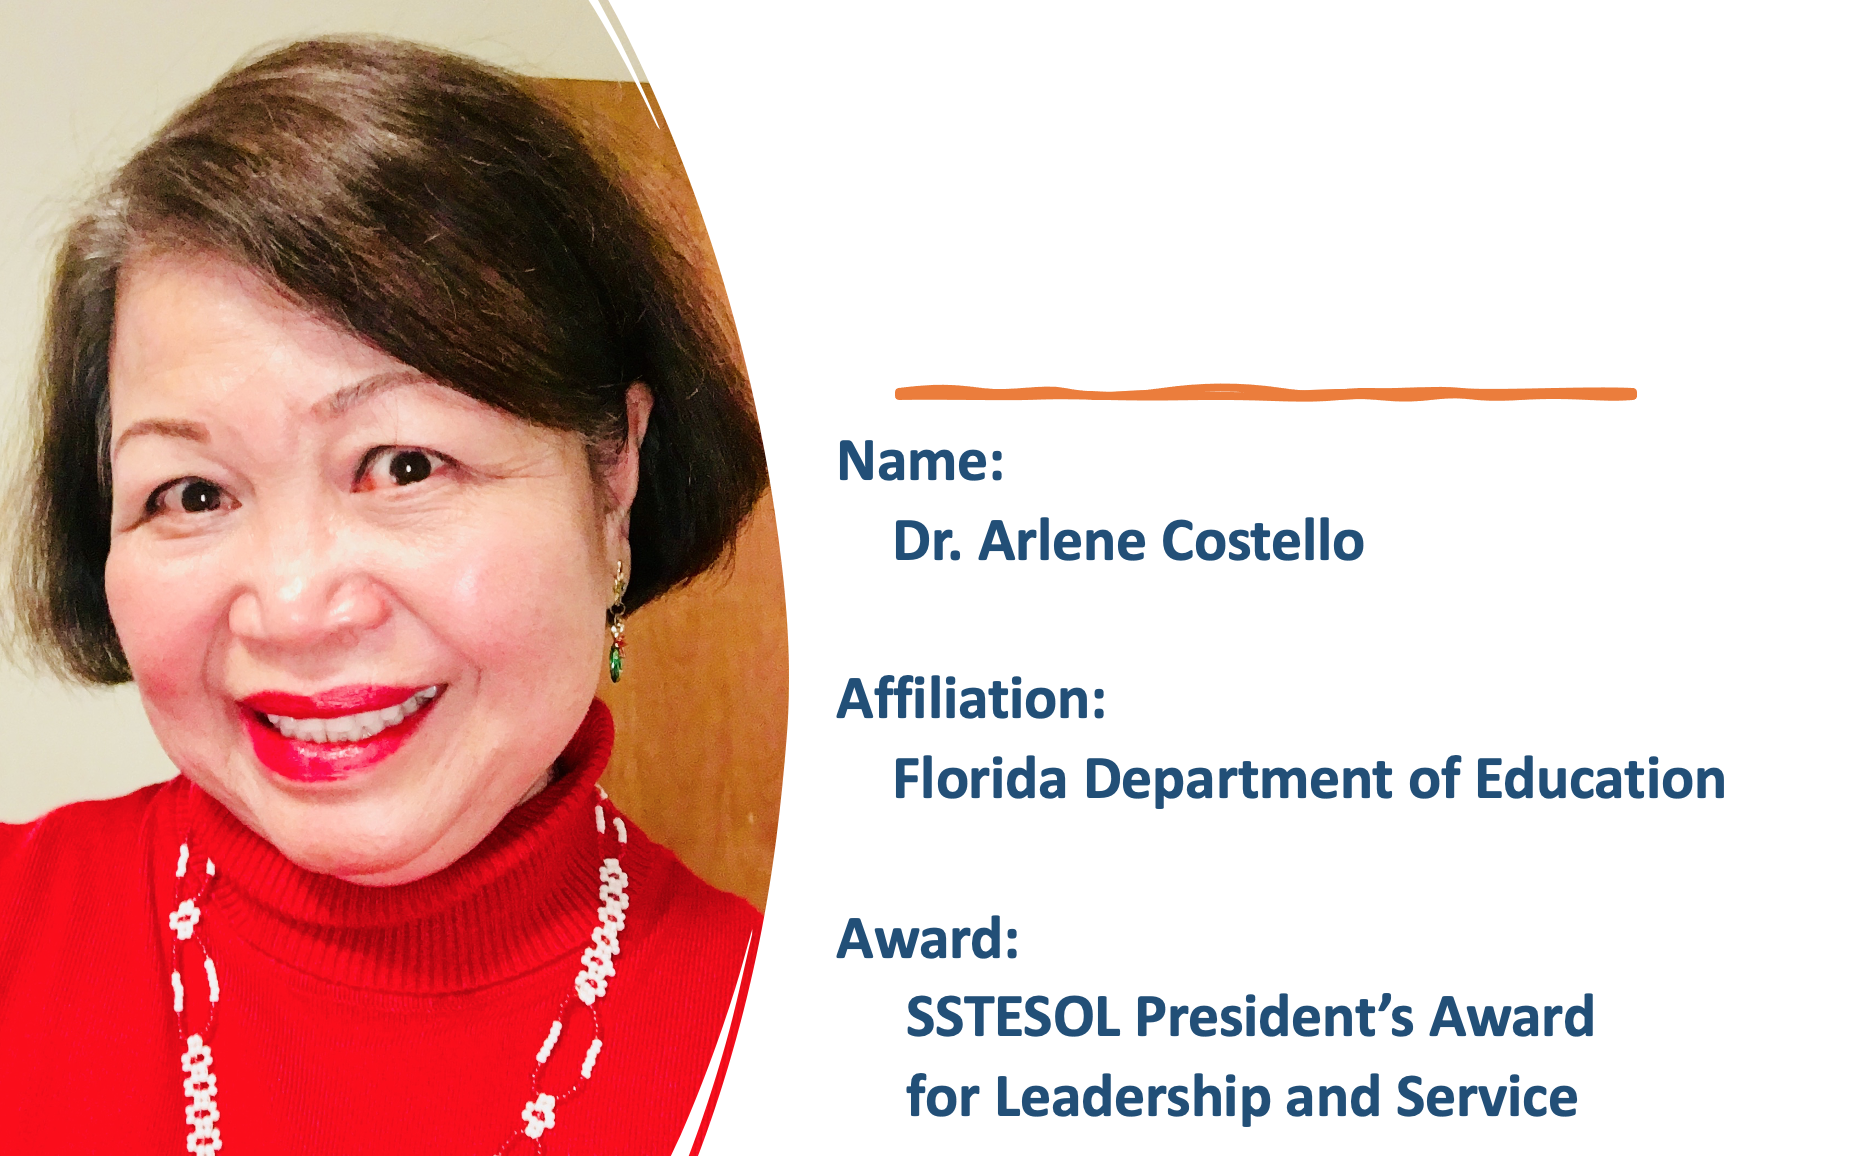 Dr. Arlene Costello of the Florida Department of Education. Awarded the SSTESOL President's Award for Leadership and Service.